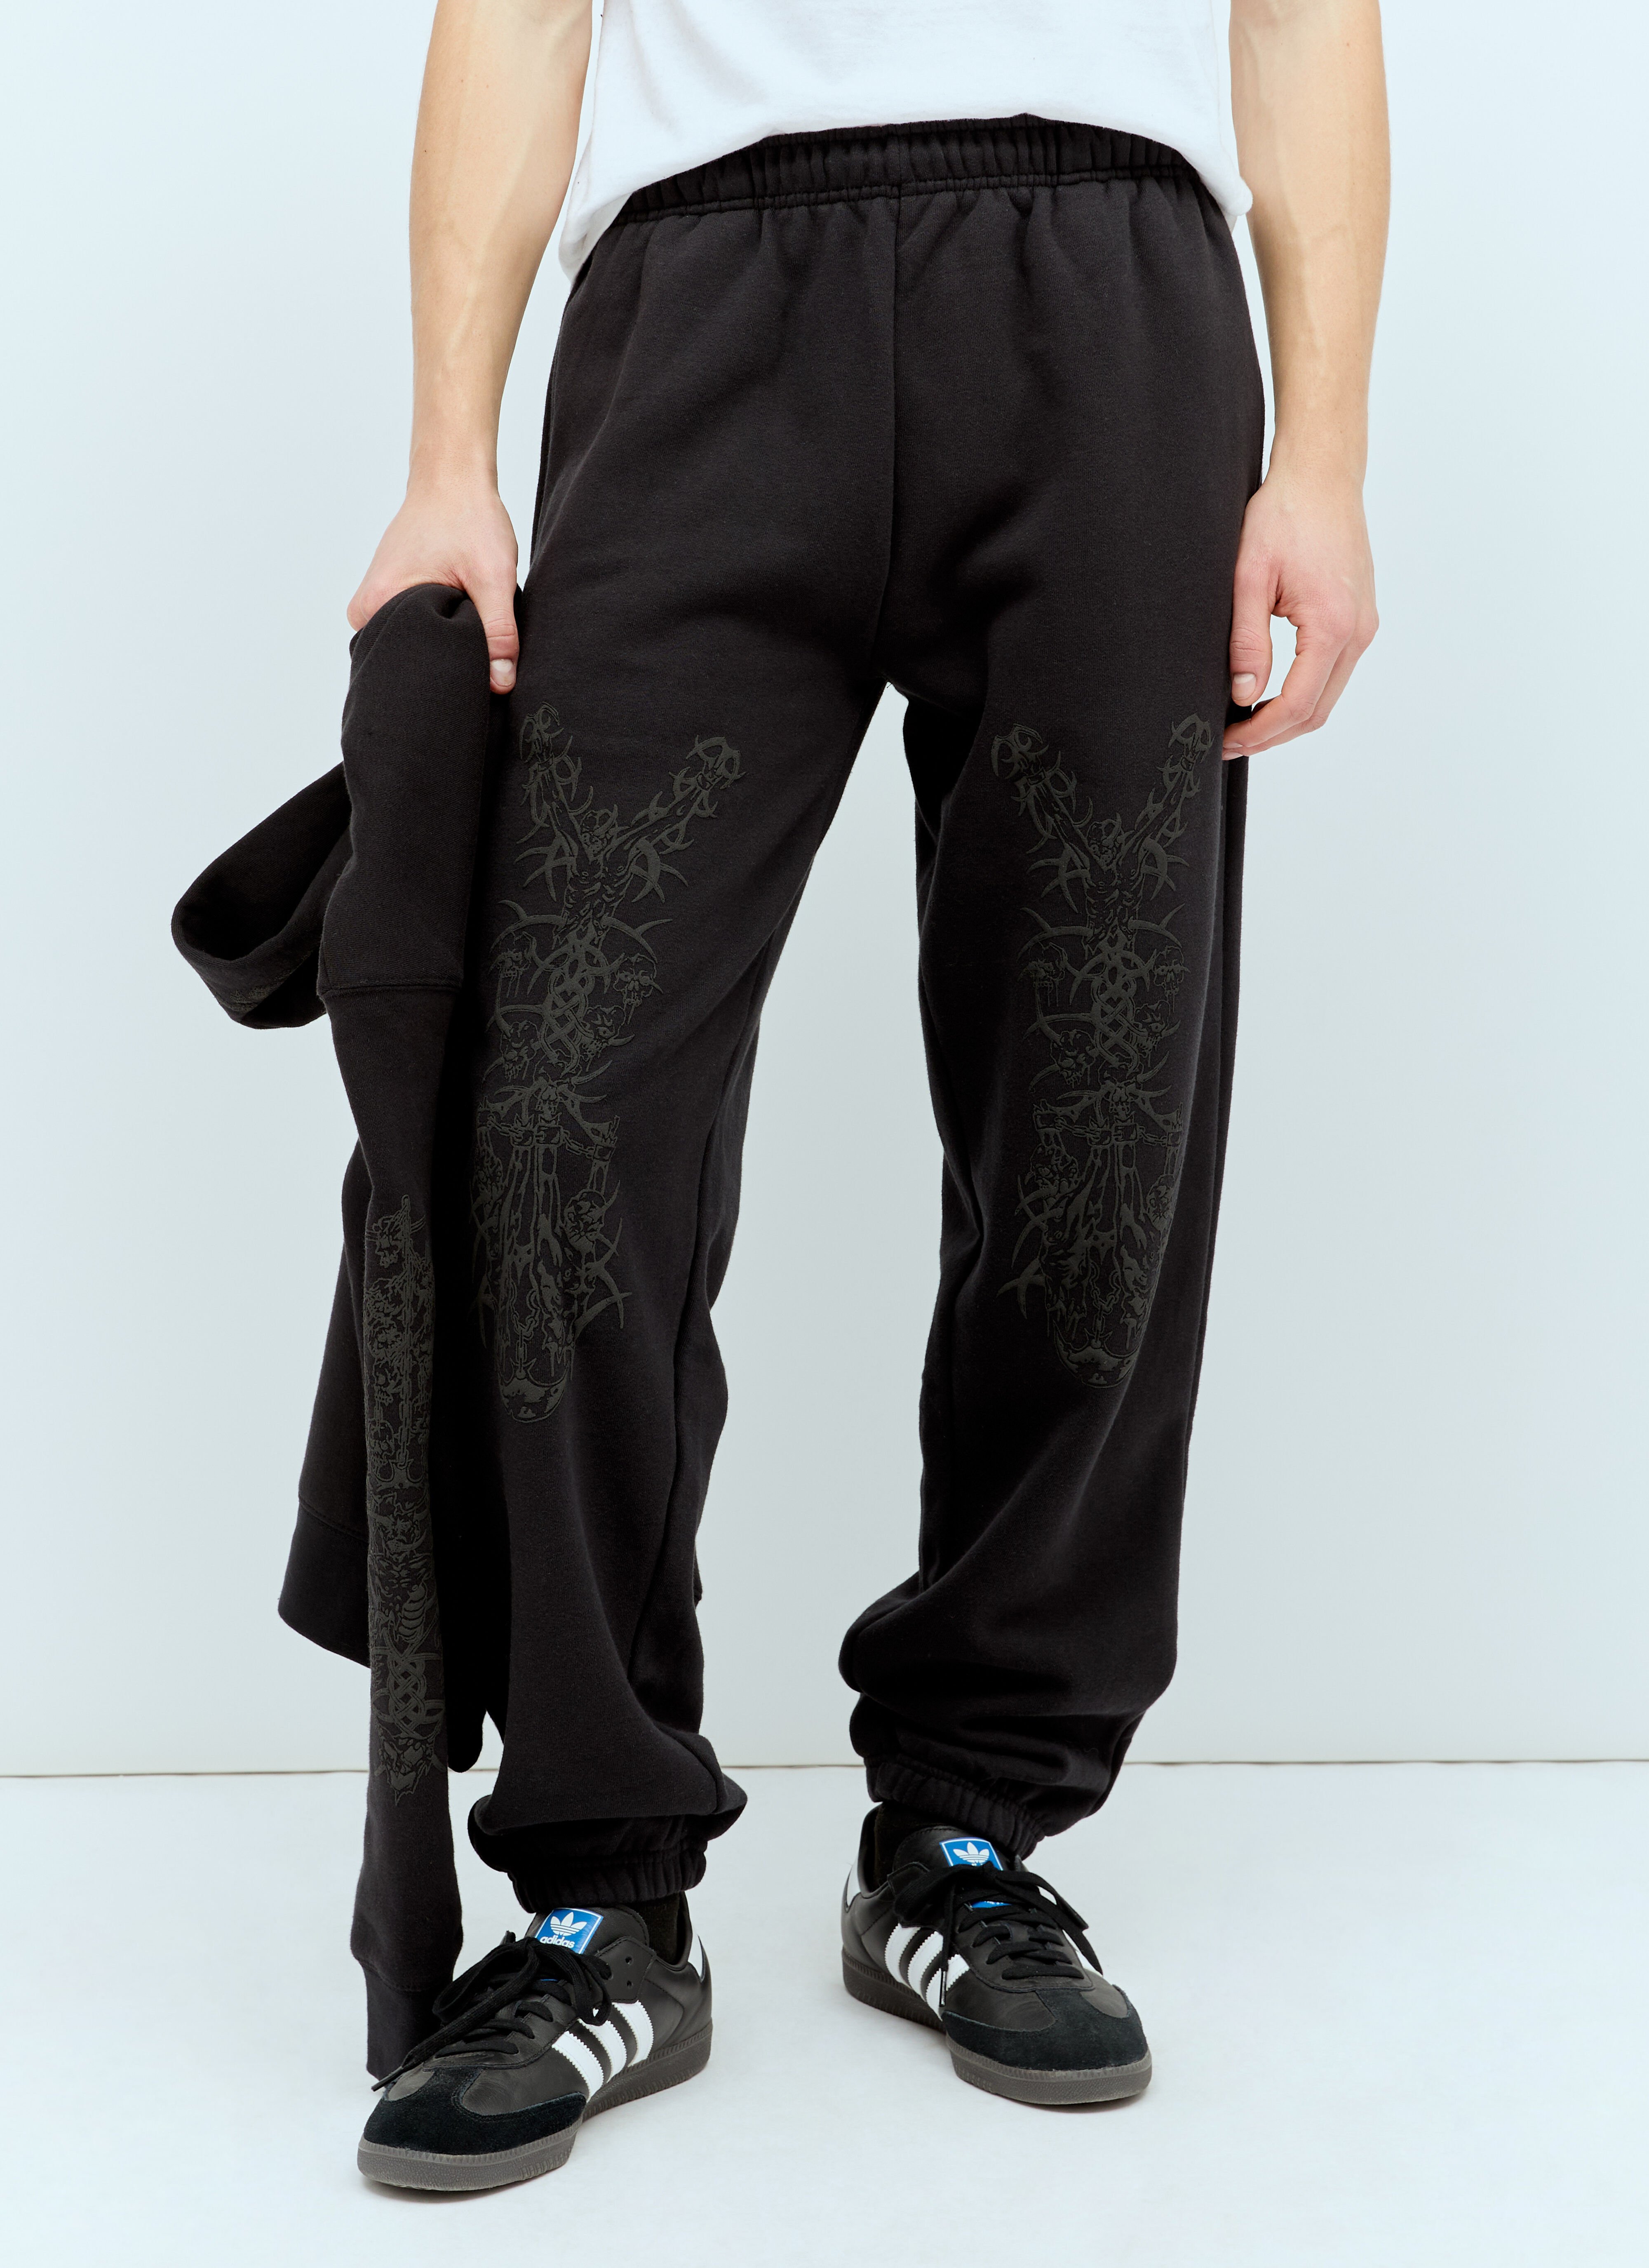 Nancy Pain And Suffering Track Pants Black ncy0155007